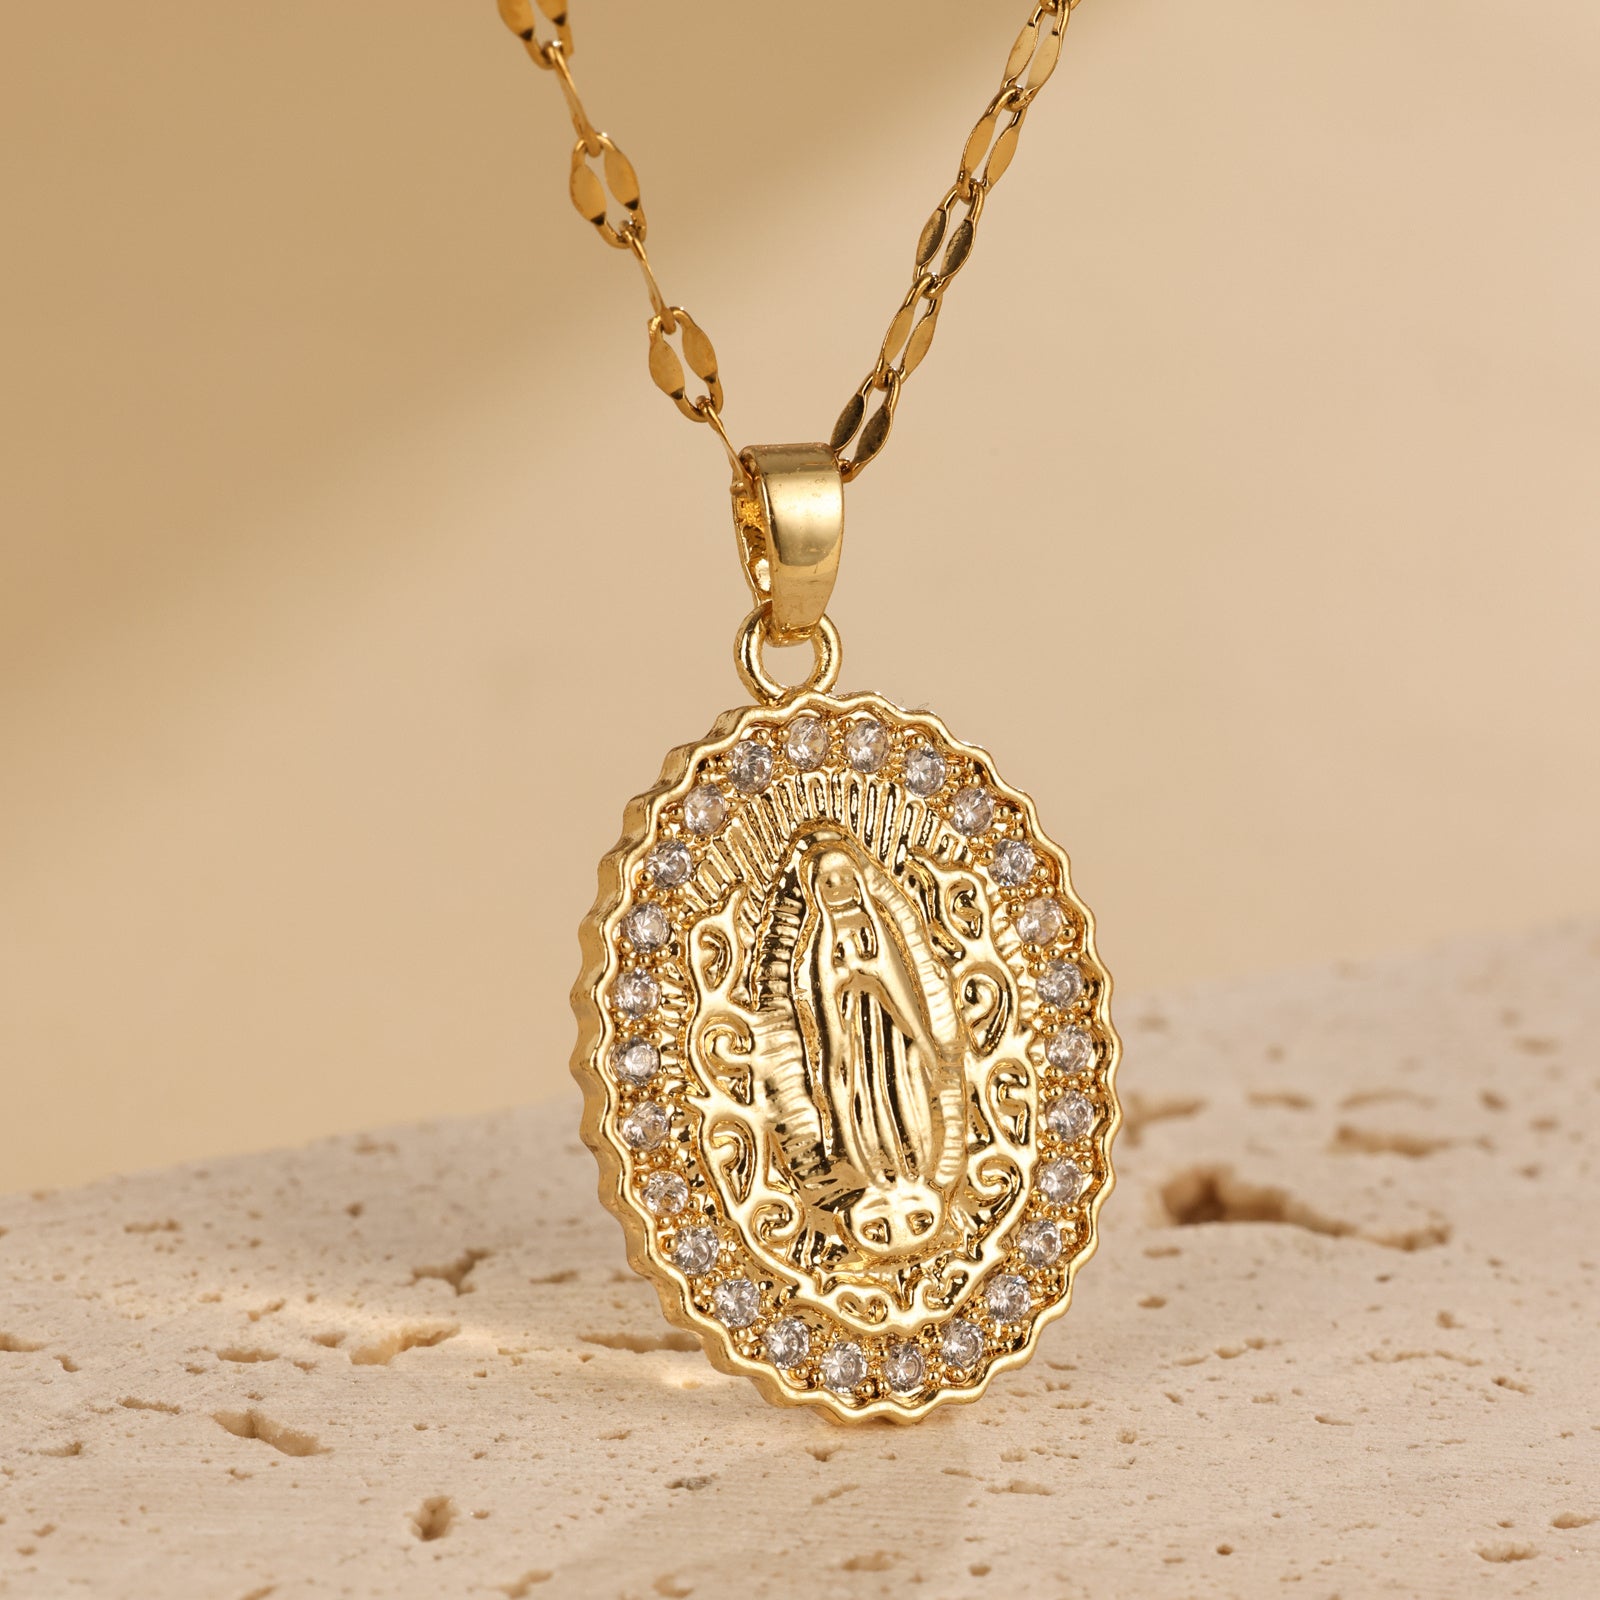 The European And American Oval Shaped Virgin Mary Pendant Necklace Exudes A Light Luxury And Niche Design Sense